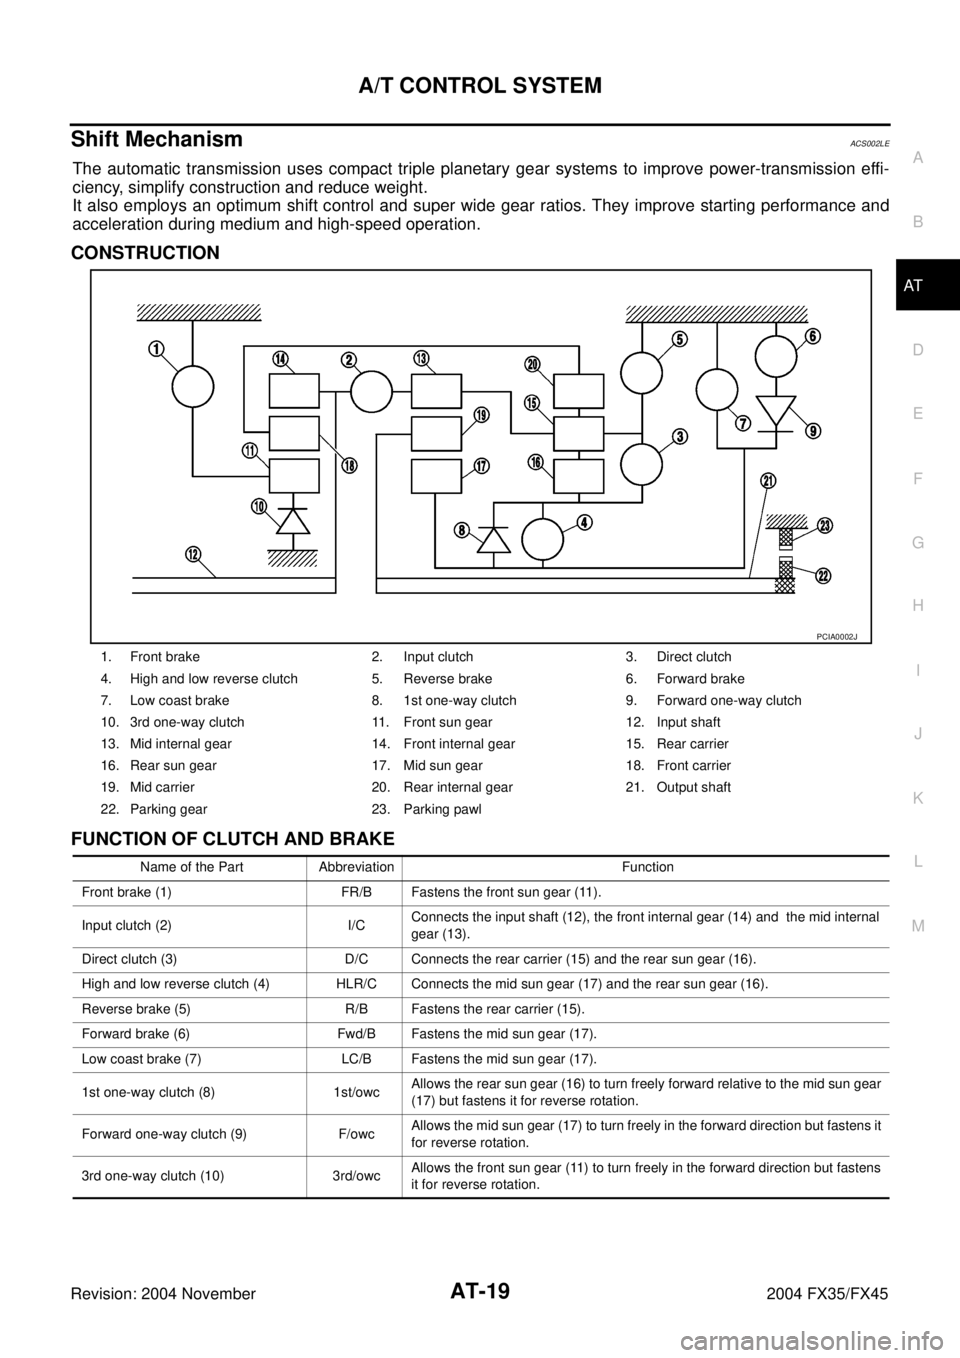 INFINITI FX35 2004  Service Manual A/T CONTROL SYSTEM
AT-19
D
E
F
G
H
I
J
K
L
MA
B
AT
Revision: 2004 November 2004 FX35/FX45
Shift MechanismACS002LE
The automatic transmission uses compact triple planetary gear systems to improve power